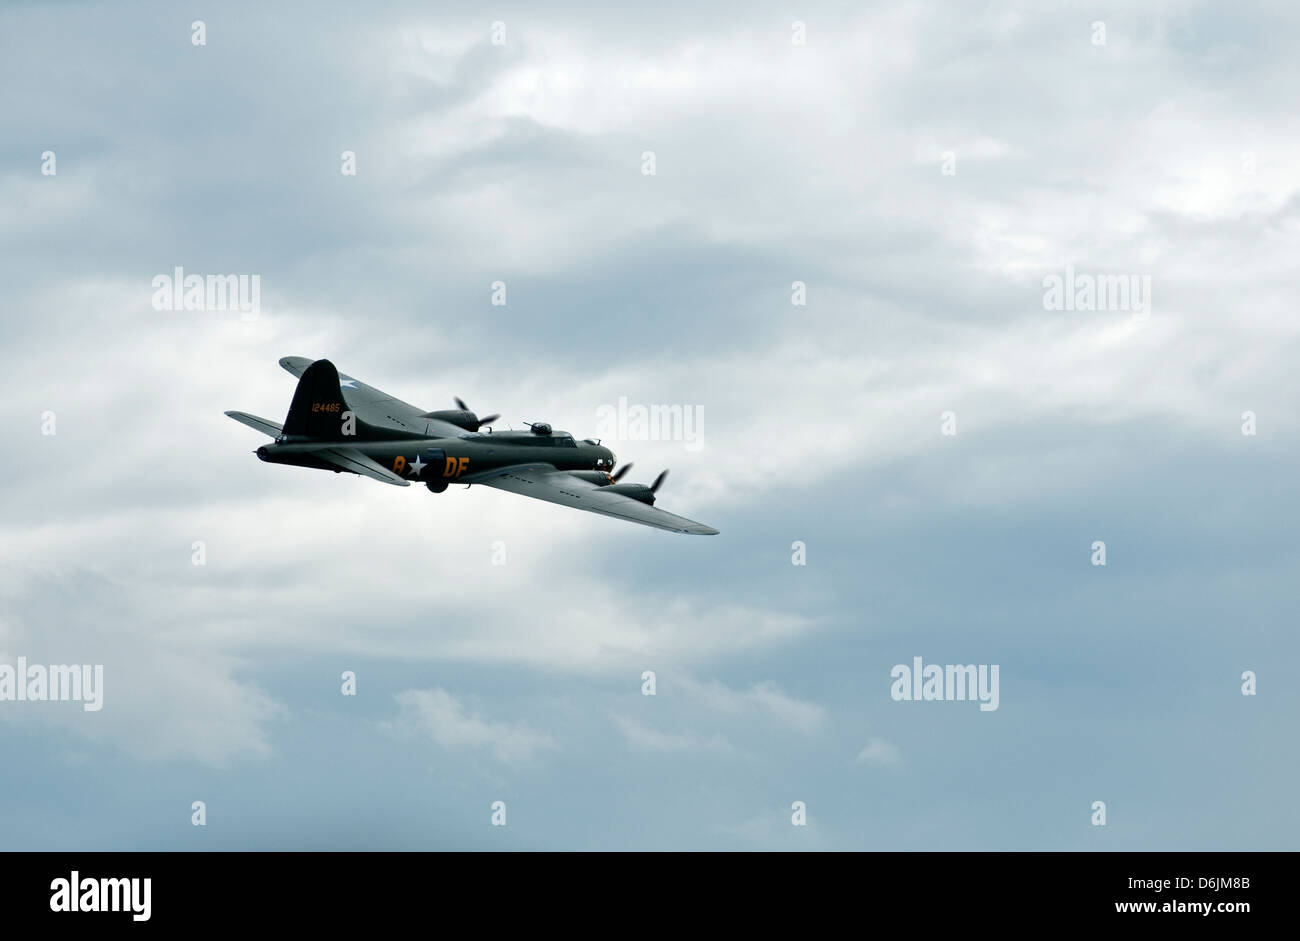 A World war two USAF B17 aircraft performs a fly past, isolated against a grey cloudy sky. Stock Photo